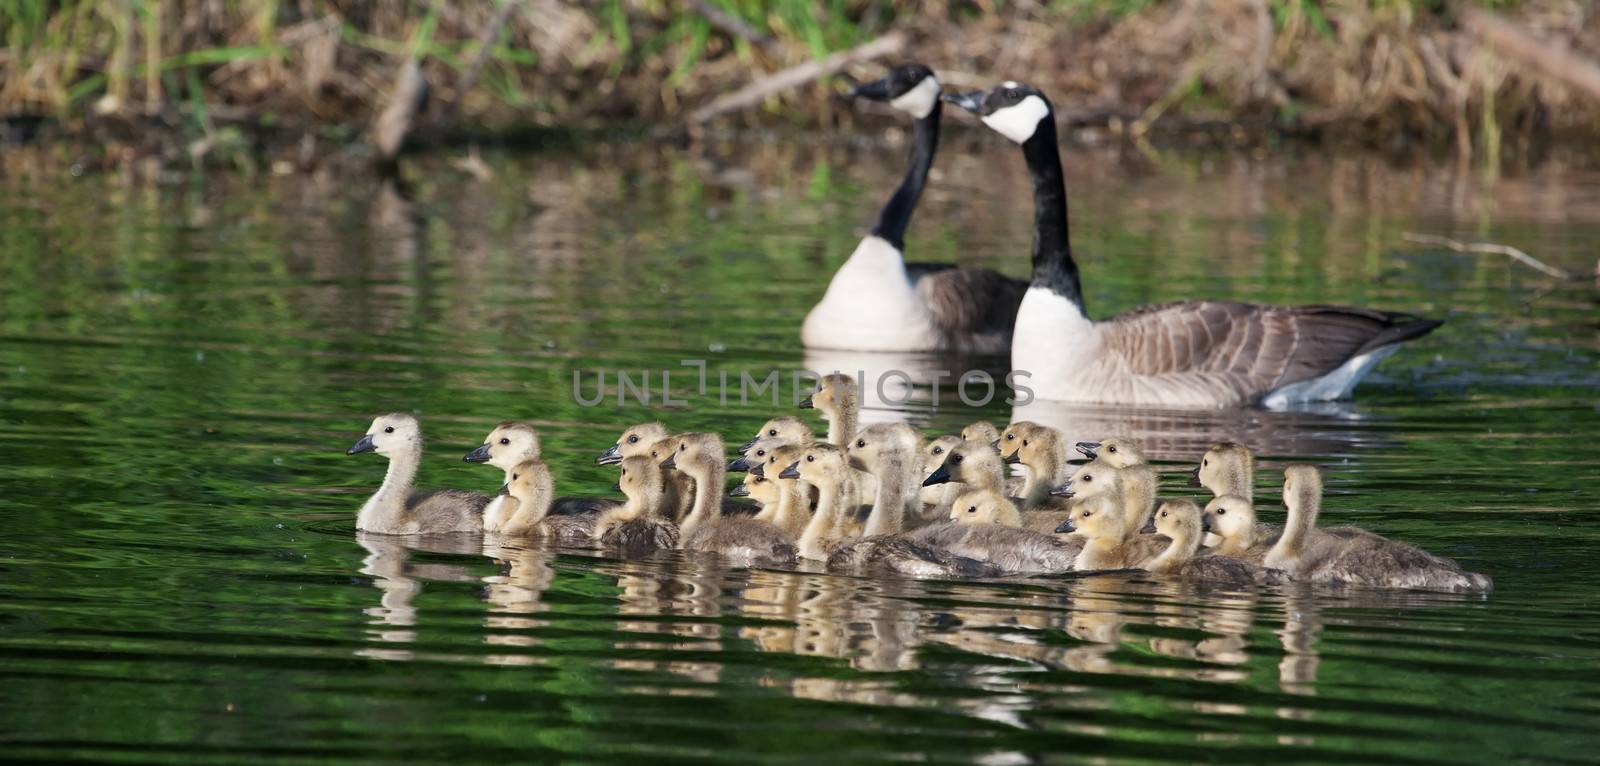 A family of Canadian goslings swimming together